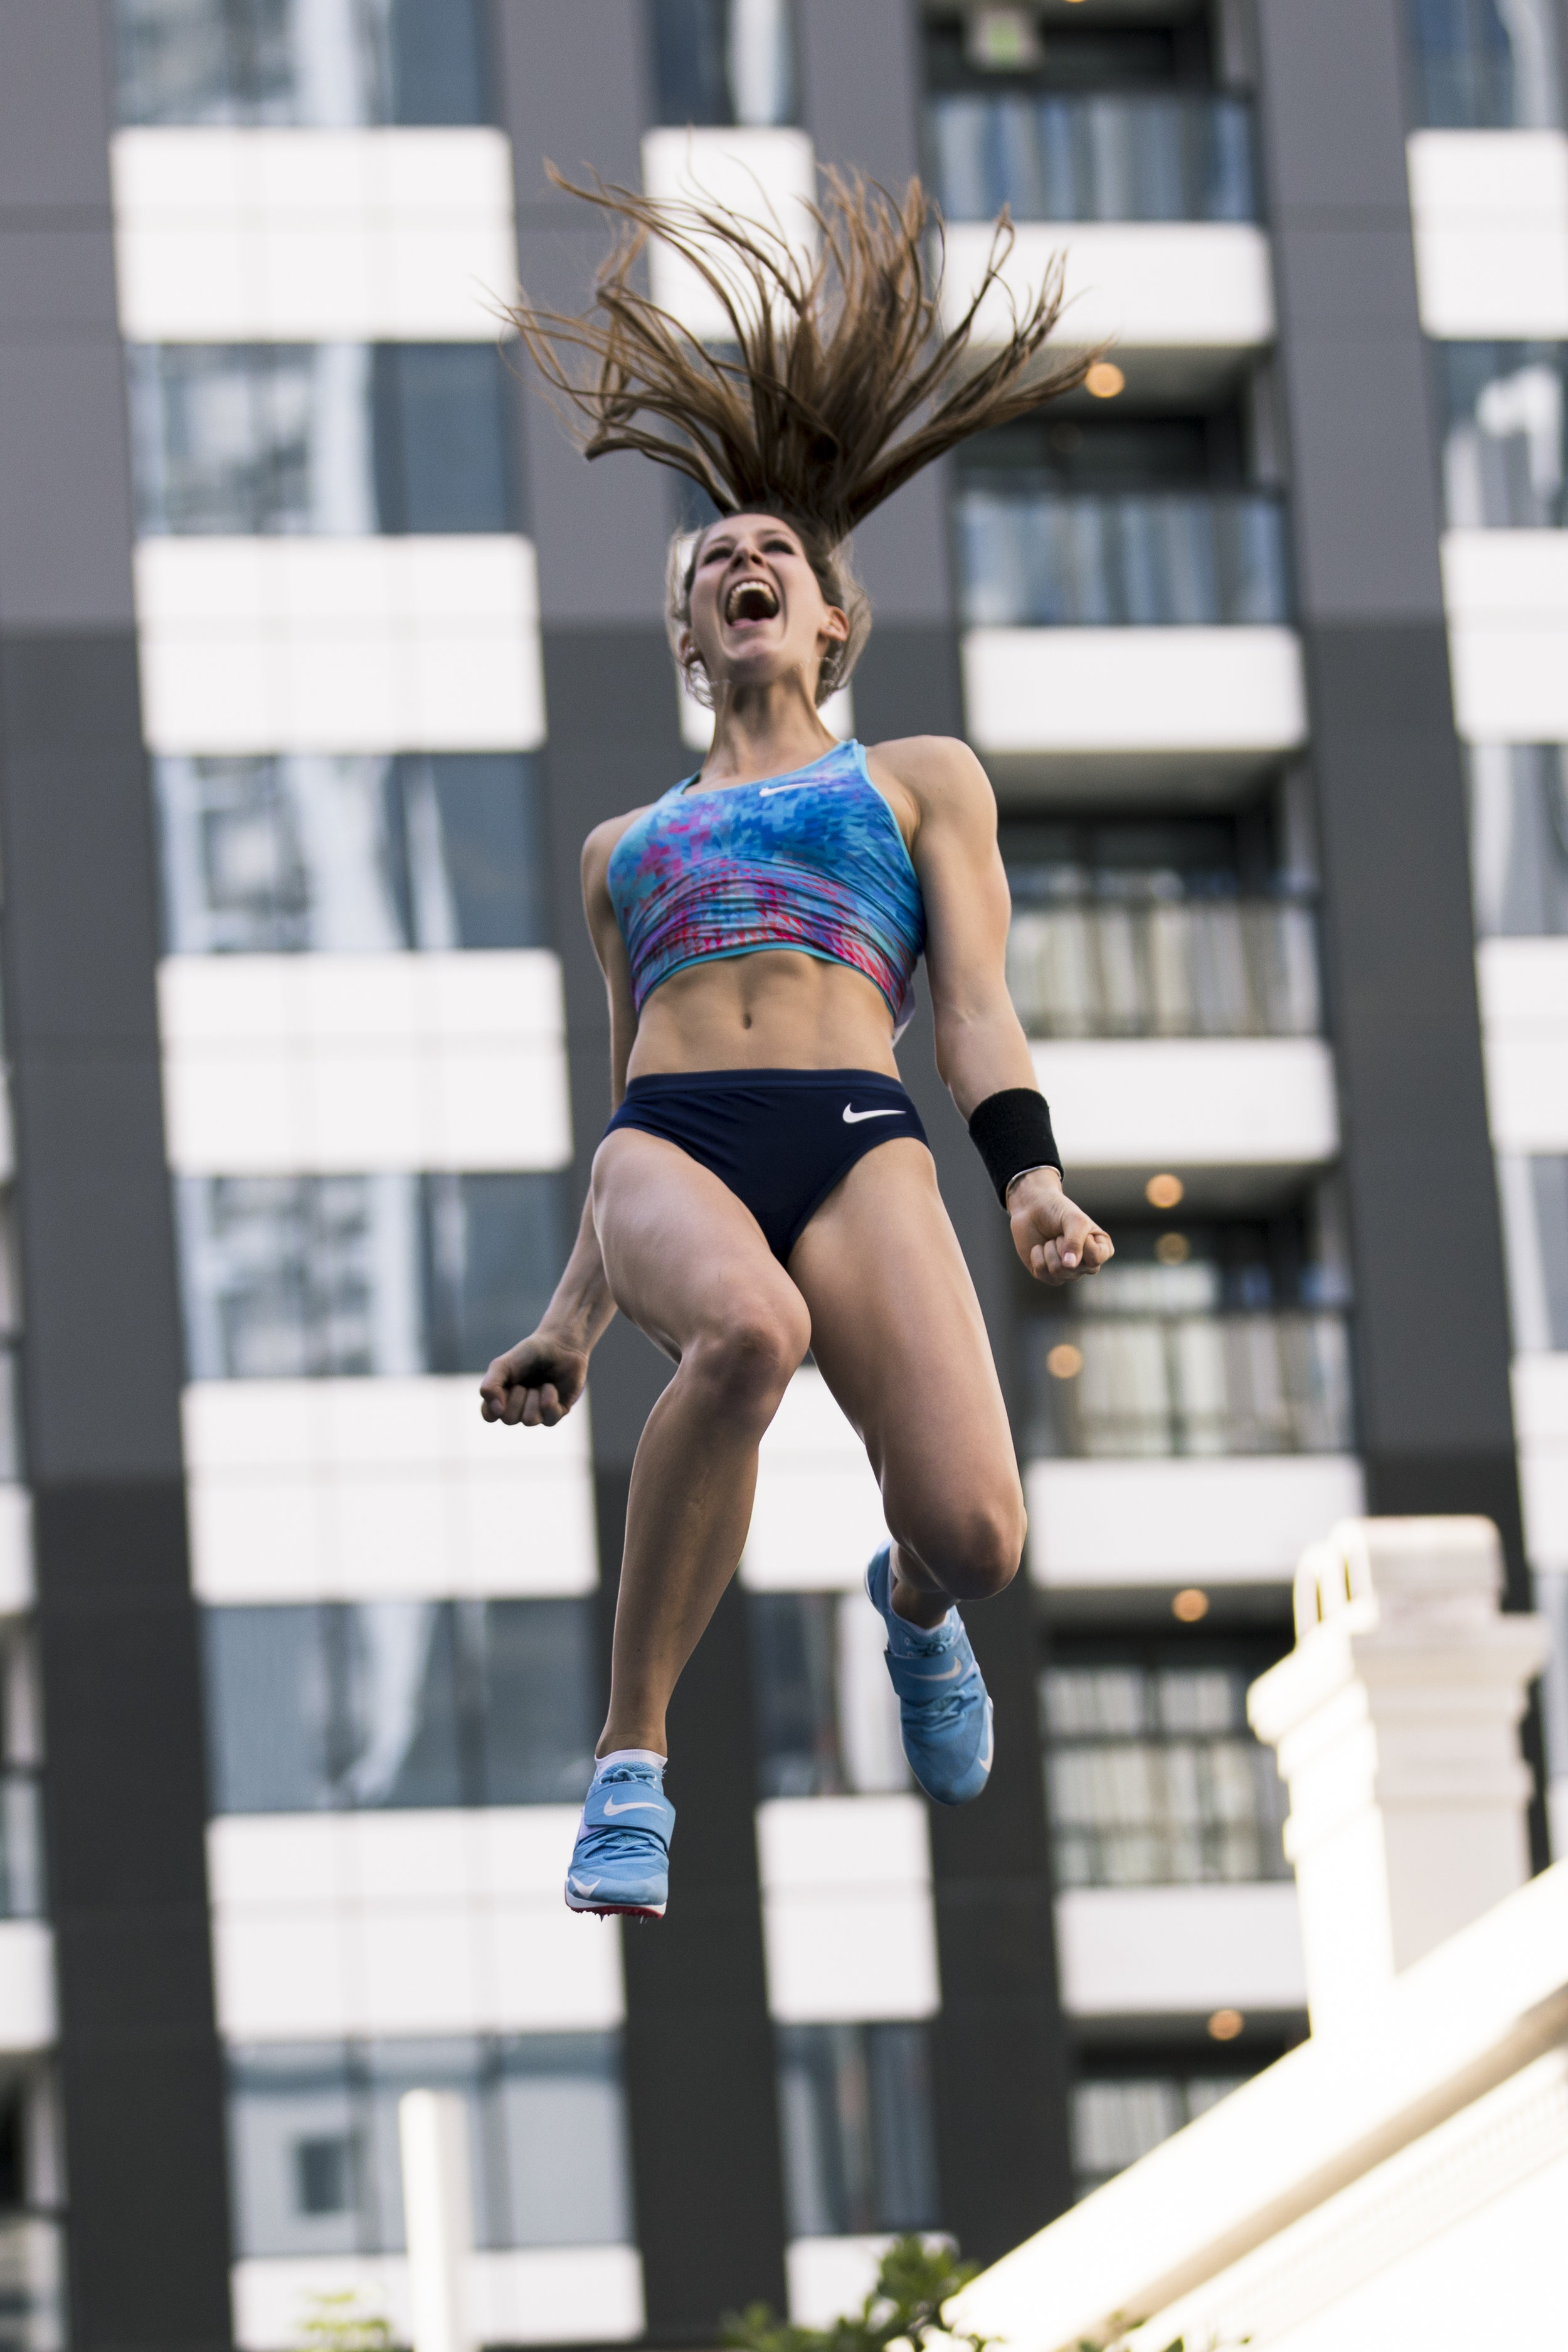  Eliza McCartney clears an exhibition personal best of 4.90m at the SKYCITY Vertical Pursuit Pole Vault Competition. Auckland, New Zealand. 18 March 2018. Copyright photo: Alisha Lovrich / www.photosport.nz 